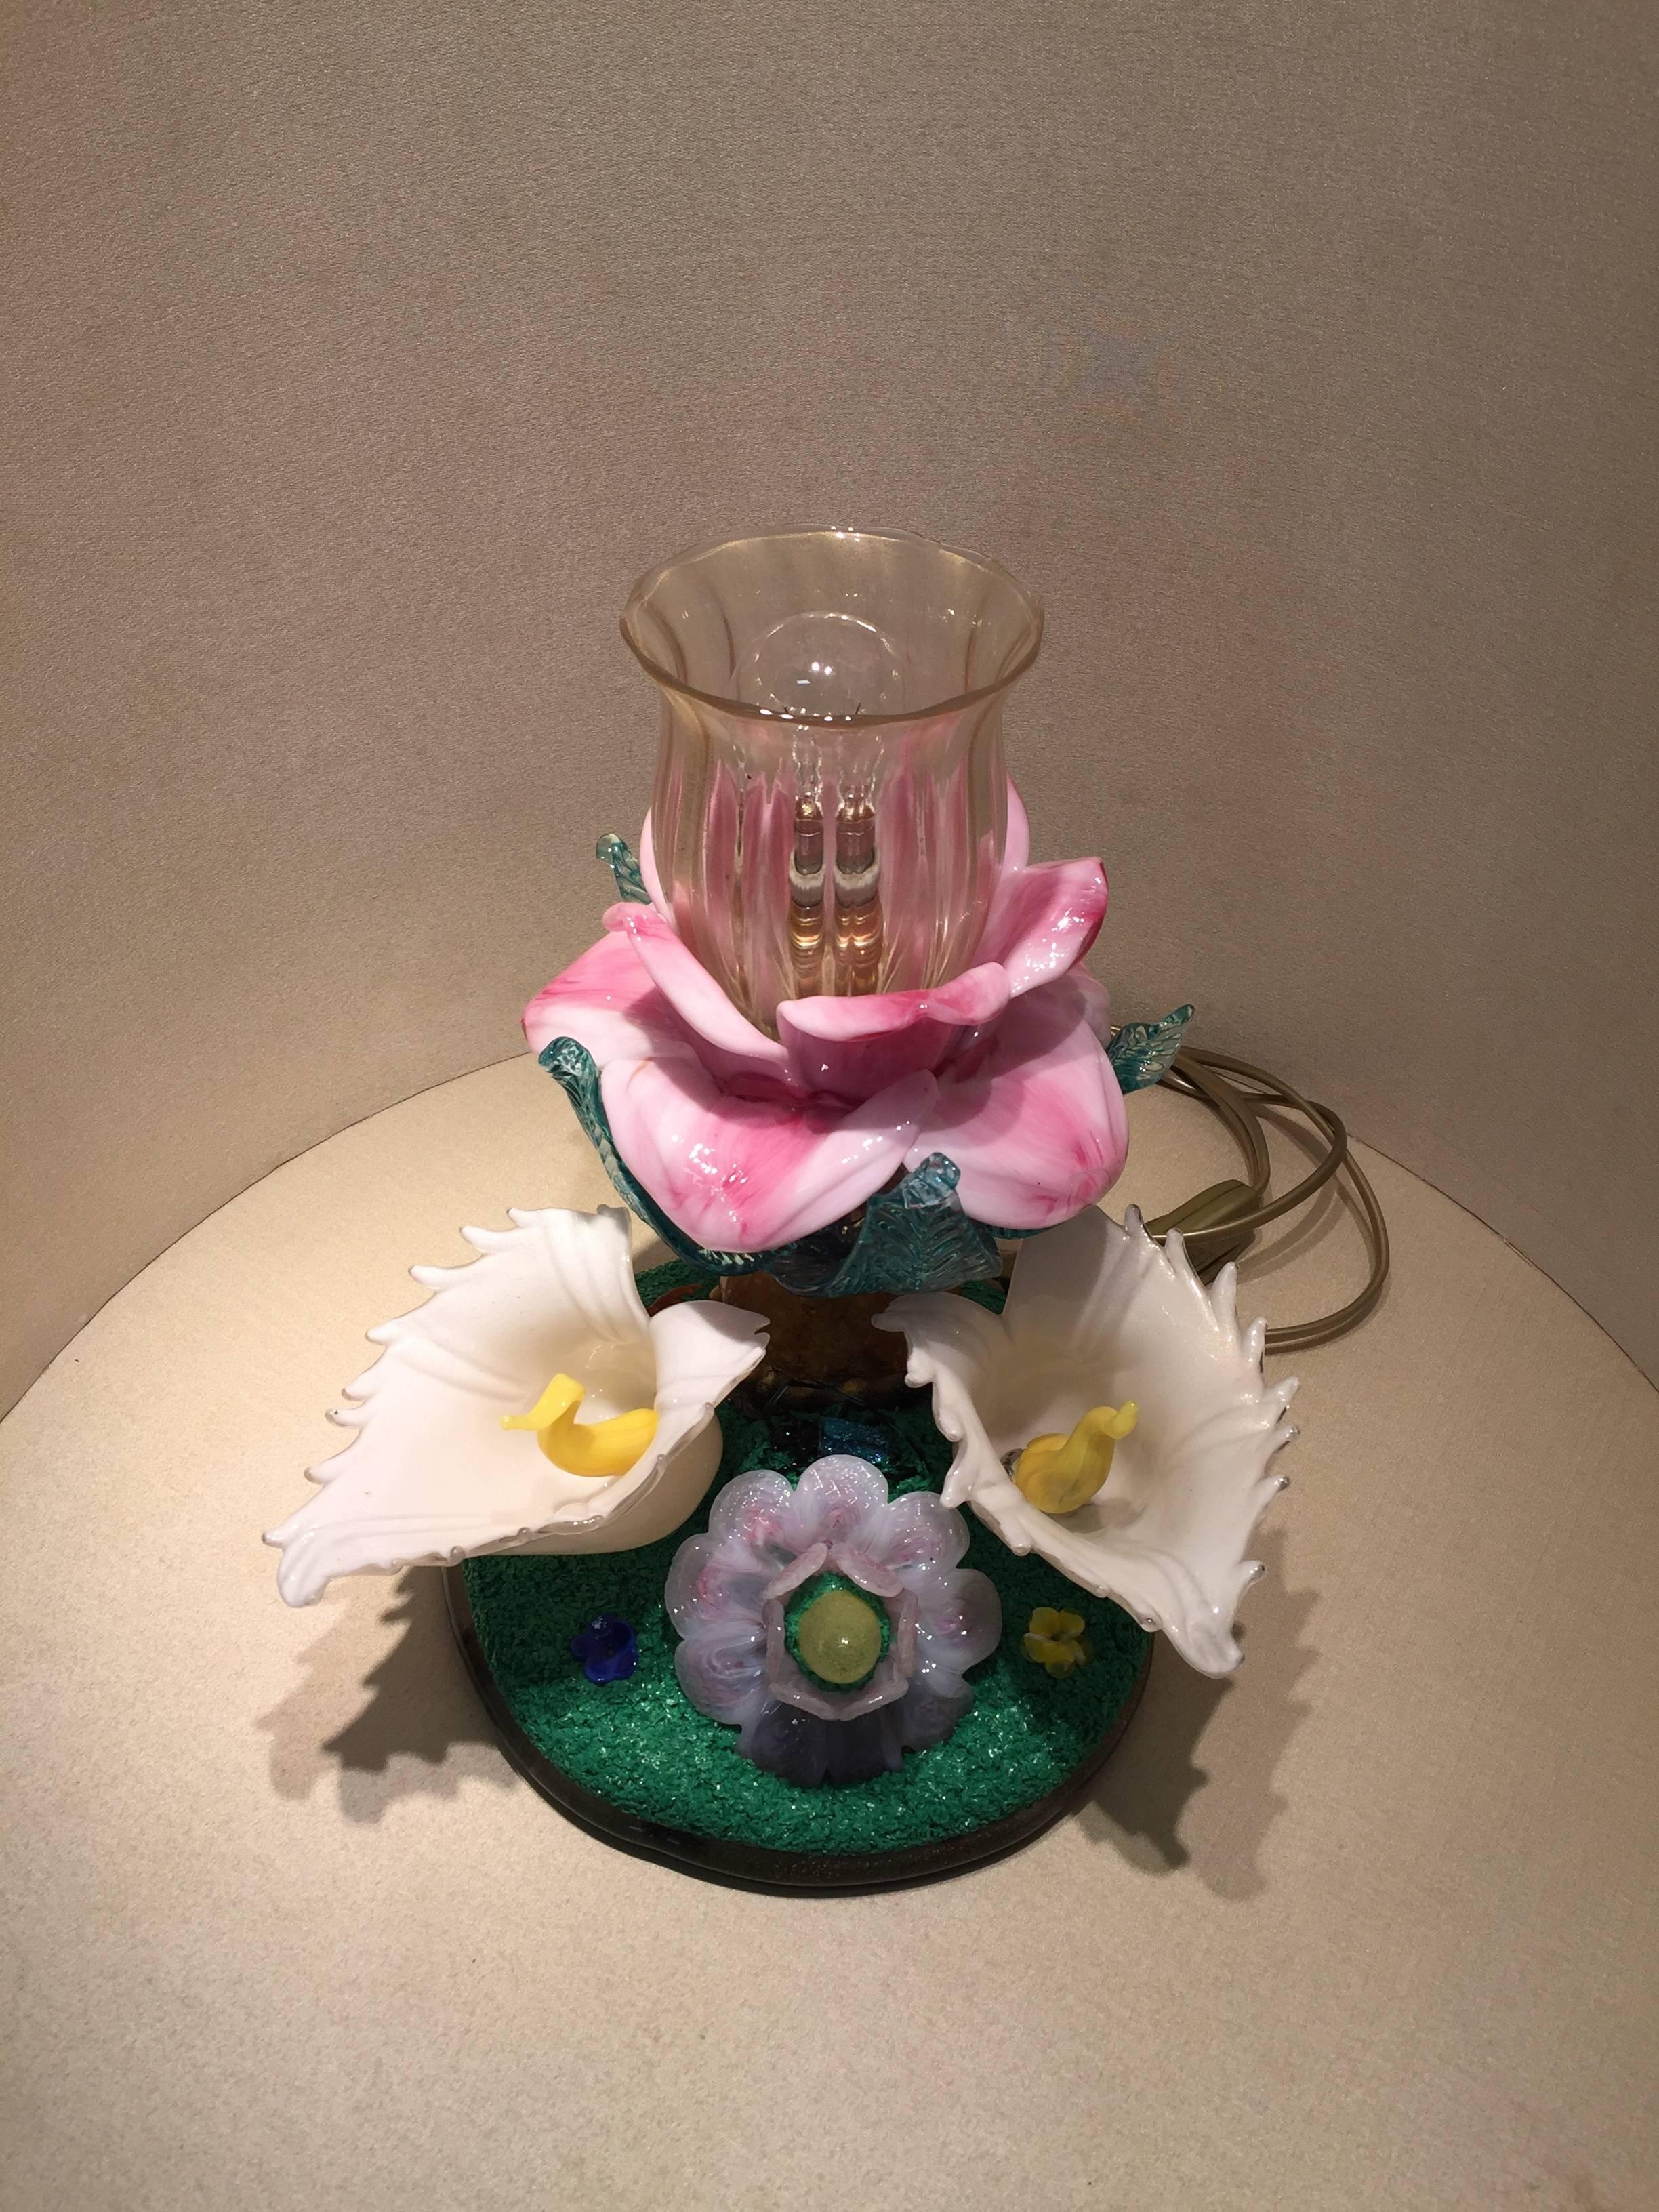 A beautiful and one of a kind Murano glass sculpture lamp with calla flowers and big rose.

Venice, with its unique history, the majesty of its palaces and façades, has over the centuries represented a magnificent open-aired workshop where great